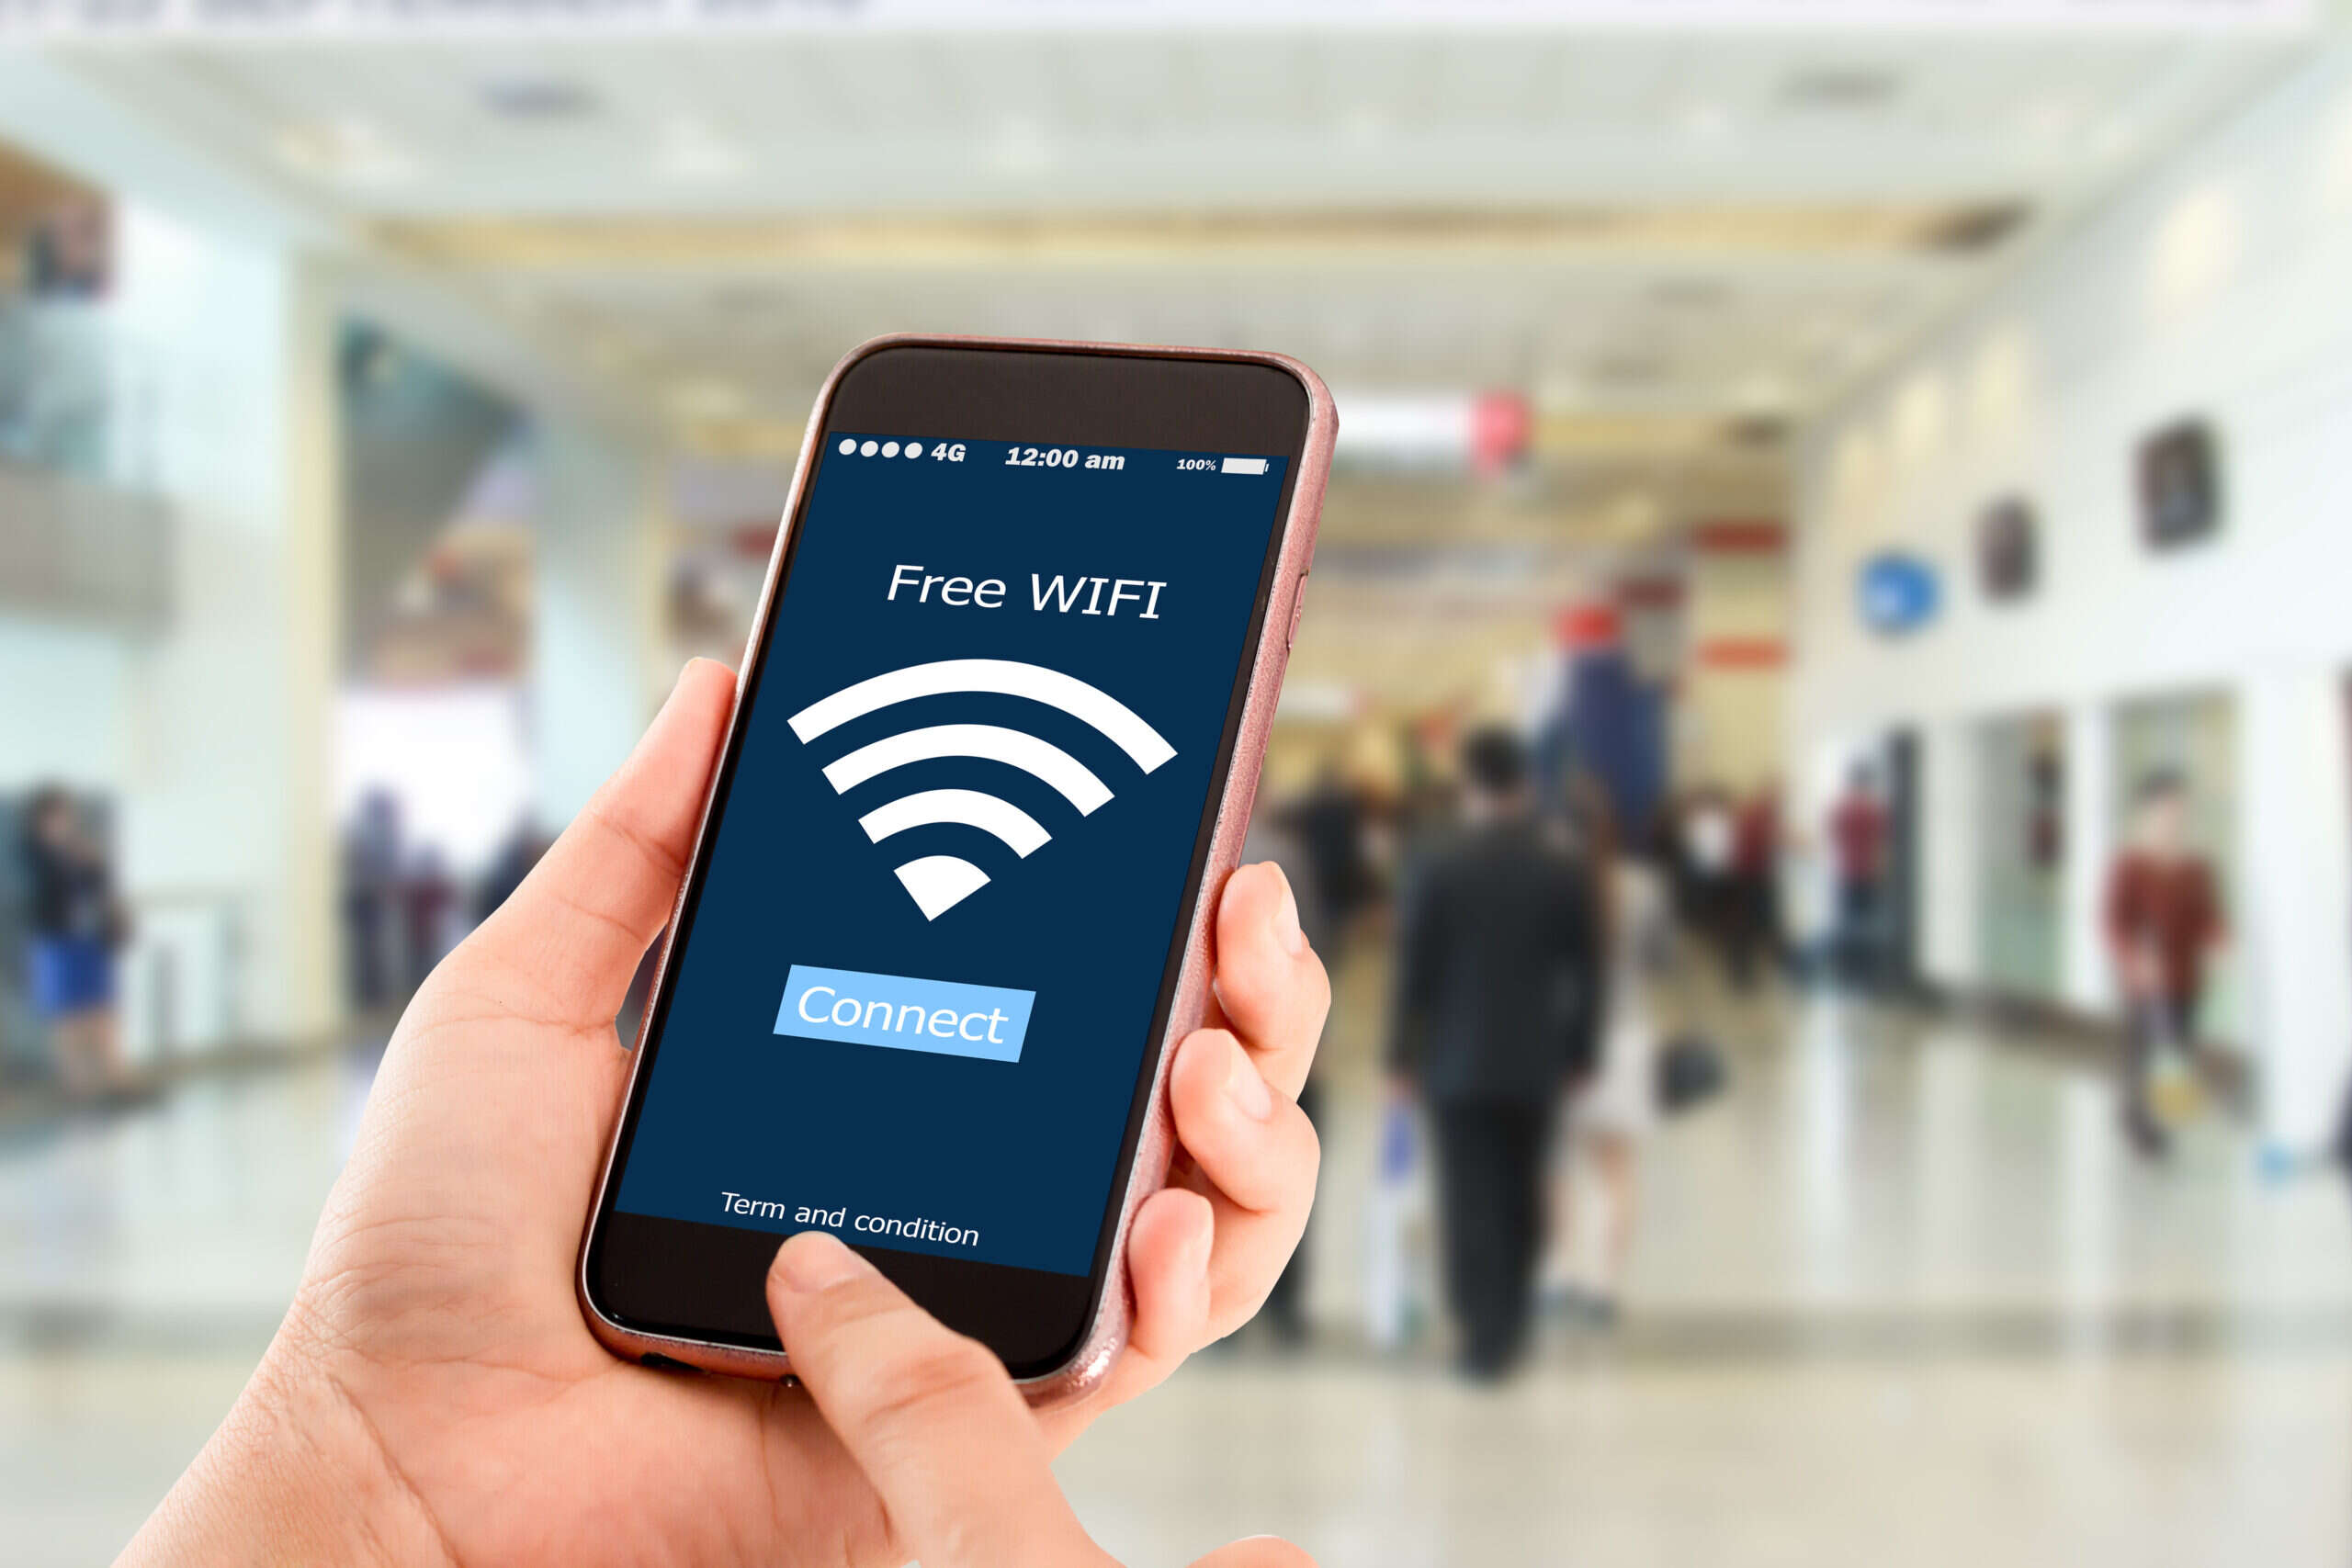 Wi-Fi 7 Explained: What Is It and When Is It Coming?